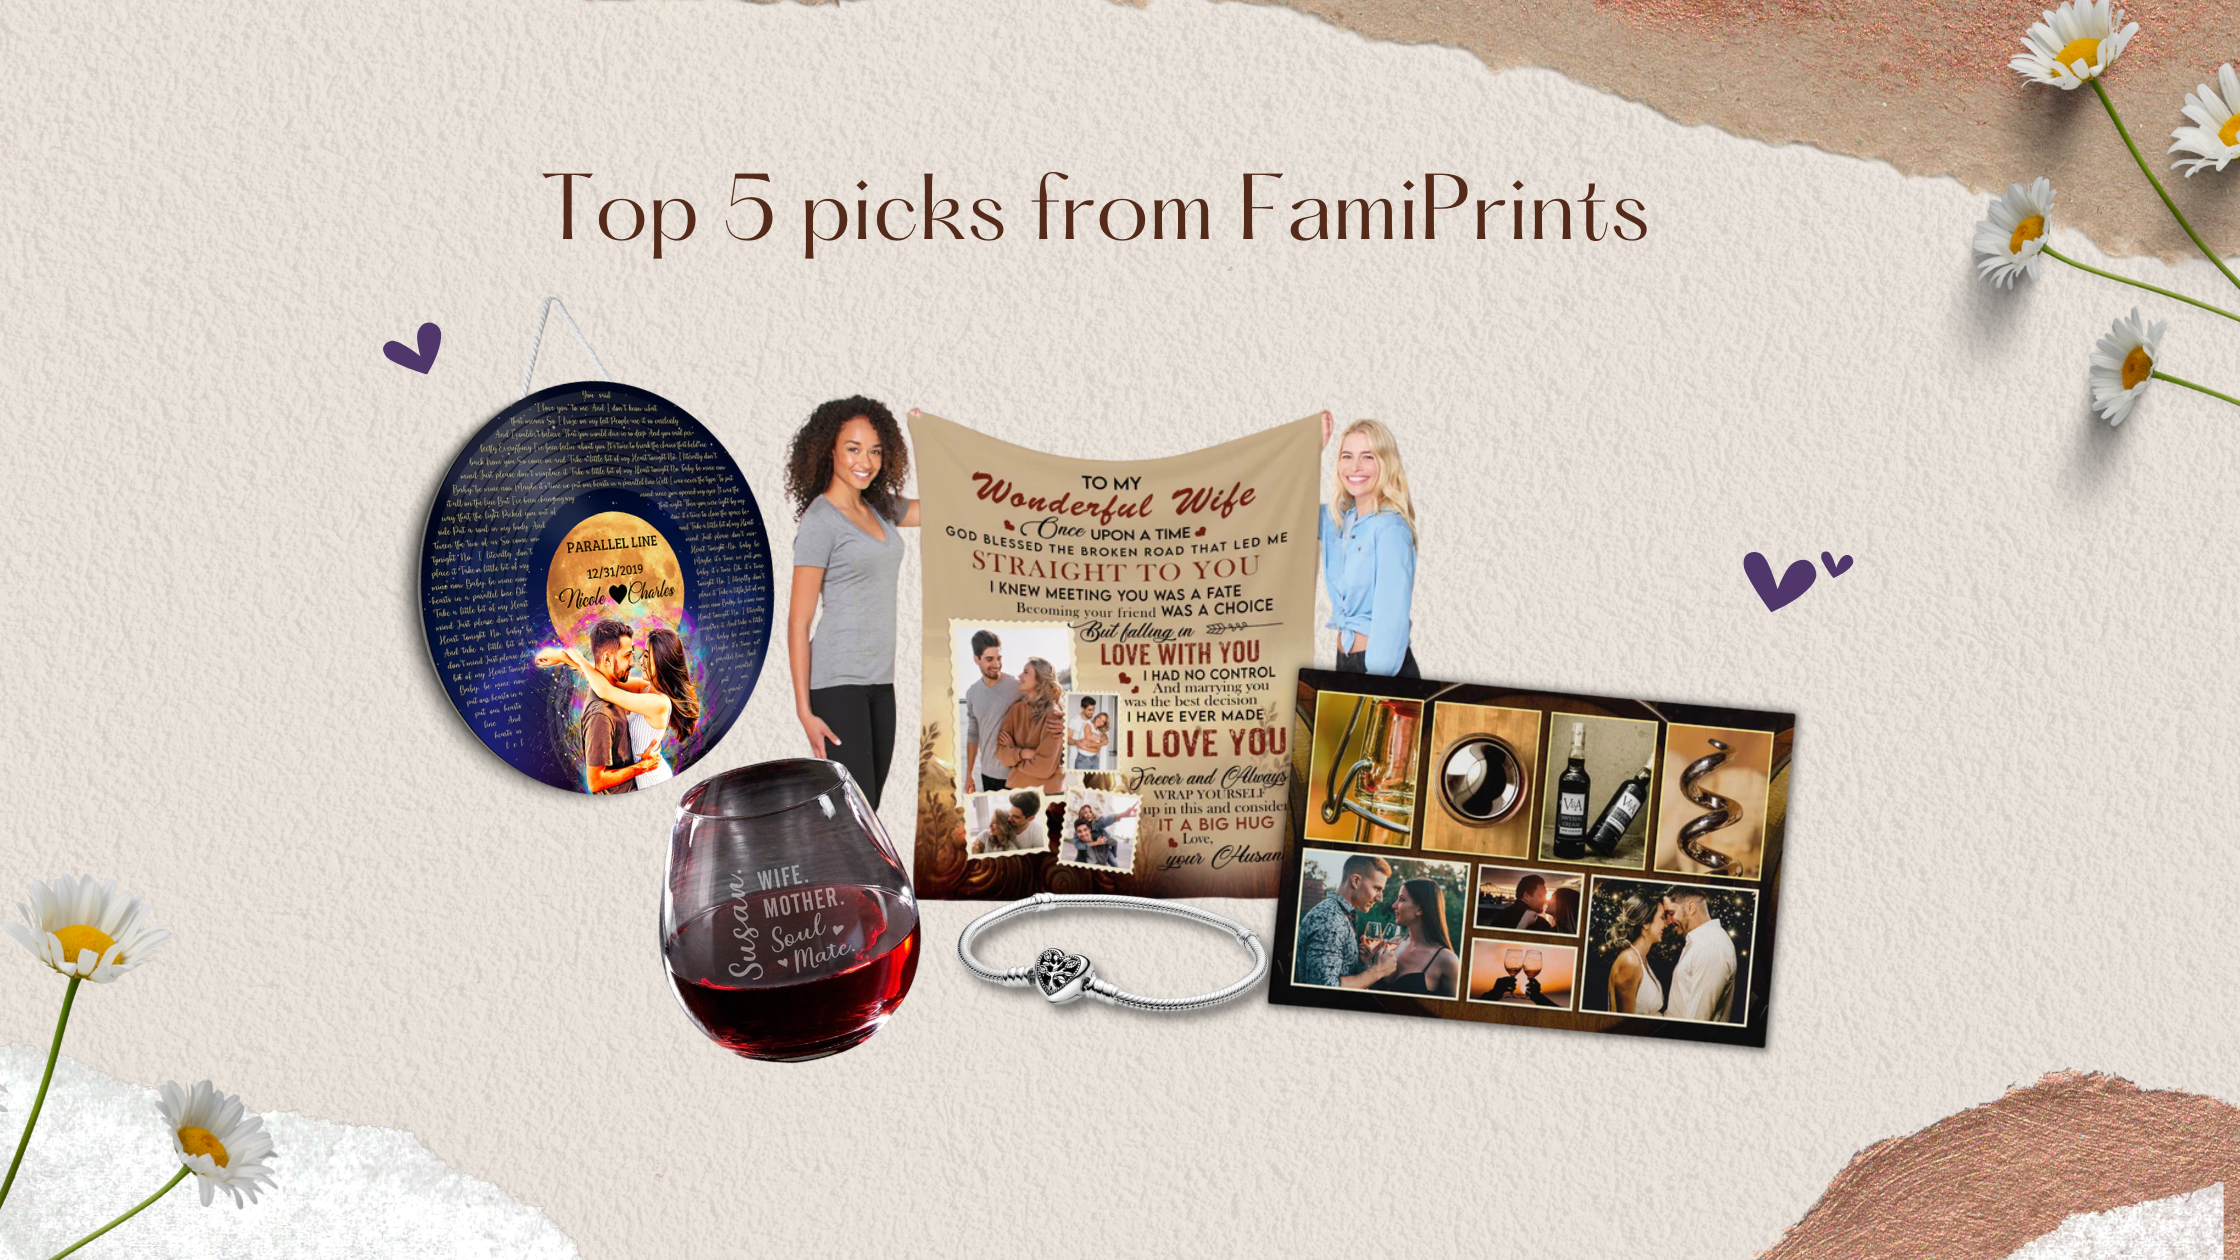 Top 5 picks from FamiPrints - Mother's day Gifts for Wife